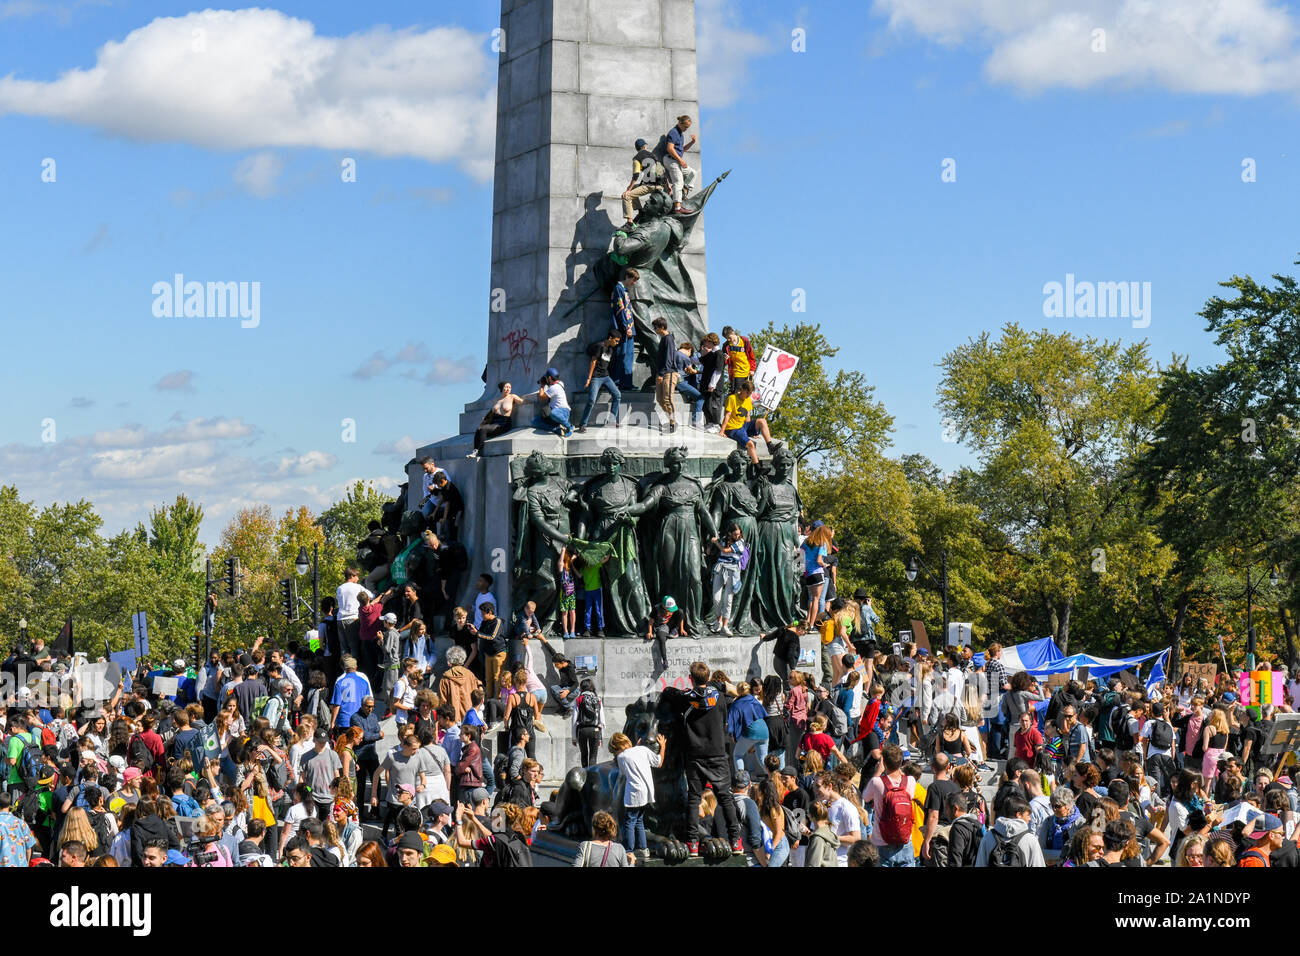 In Montreal Canada, half a million people joined the Global Climate Strike on September 27, 2019. They demanded more concrete actions from authorities to counter global warming and climate change. Stock Photo